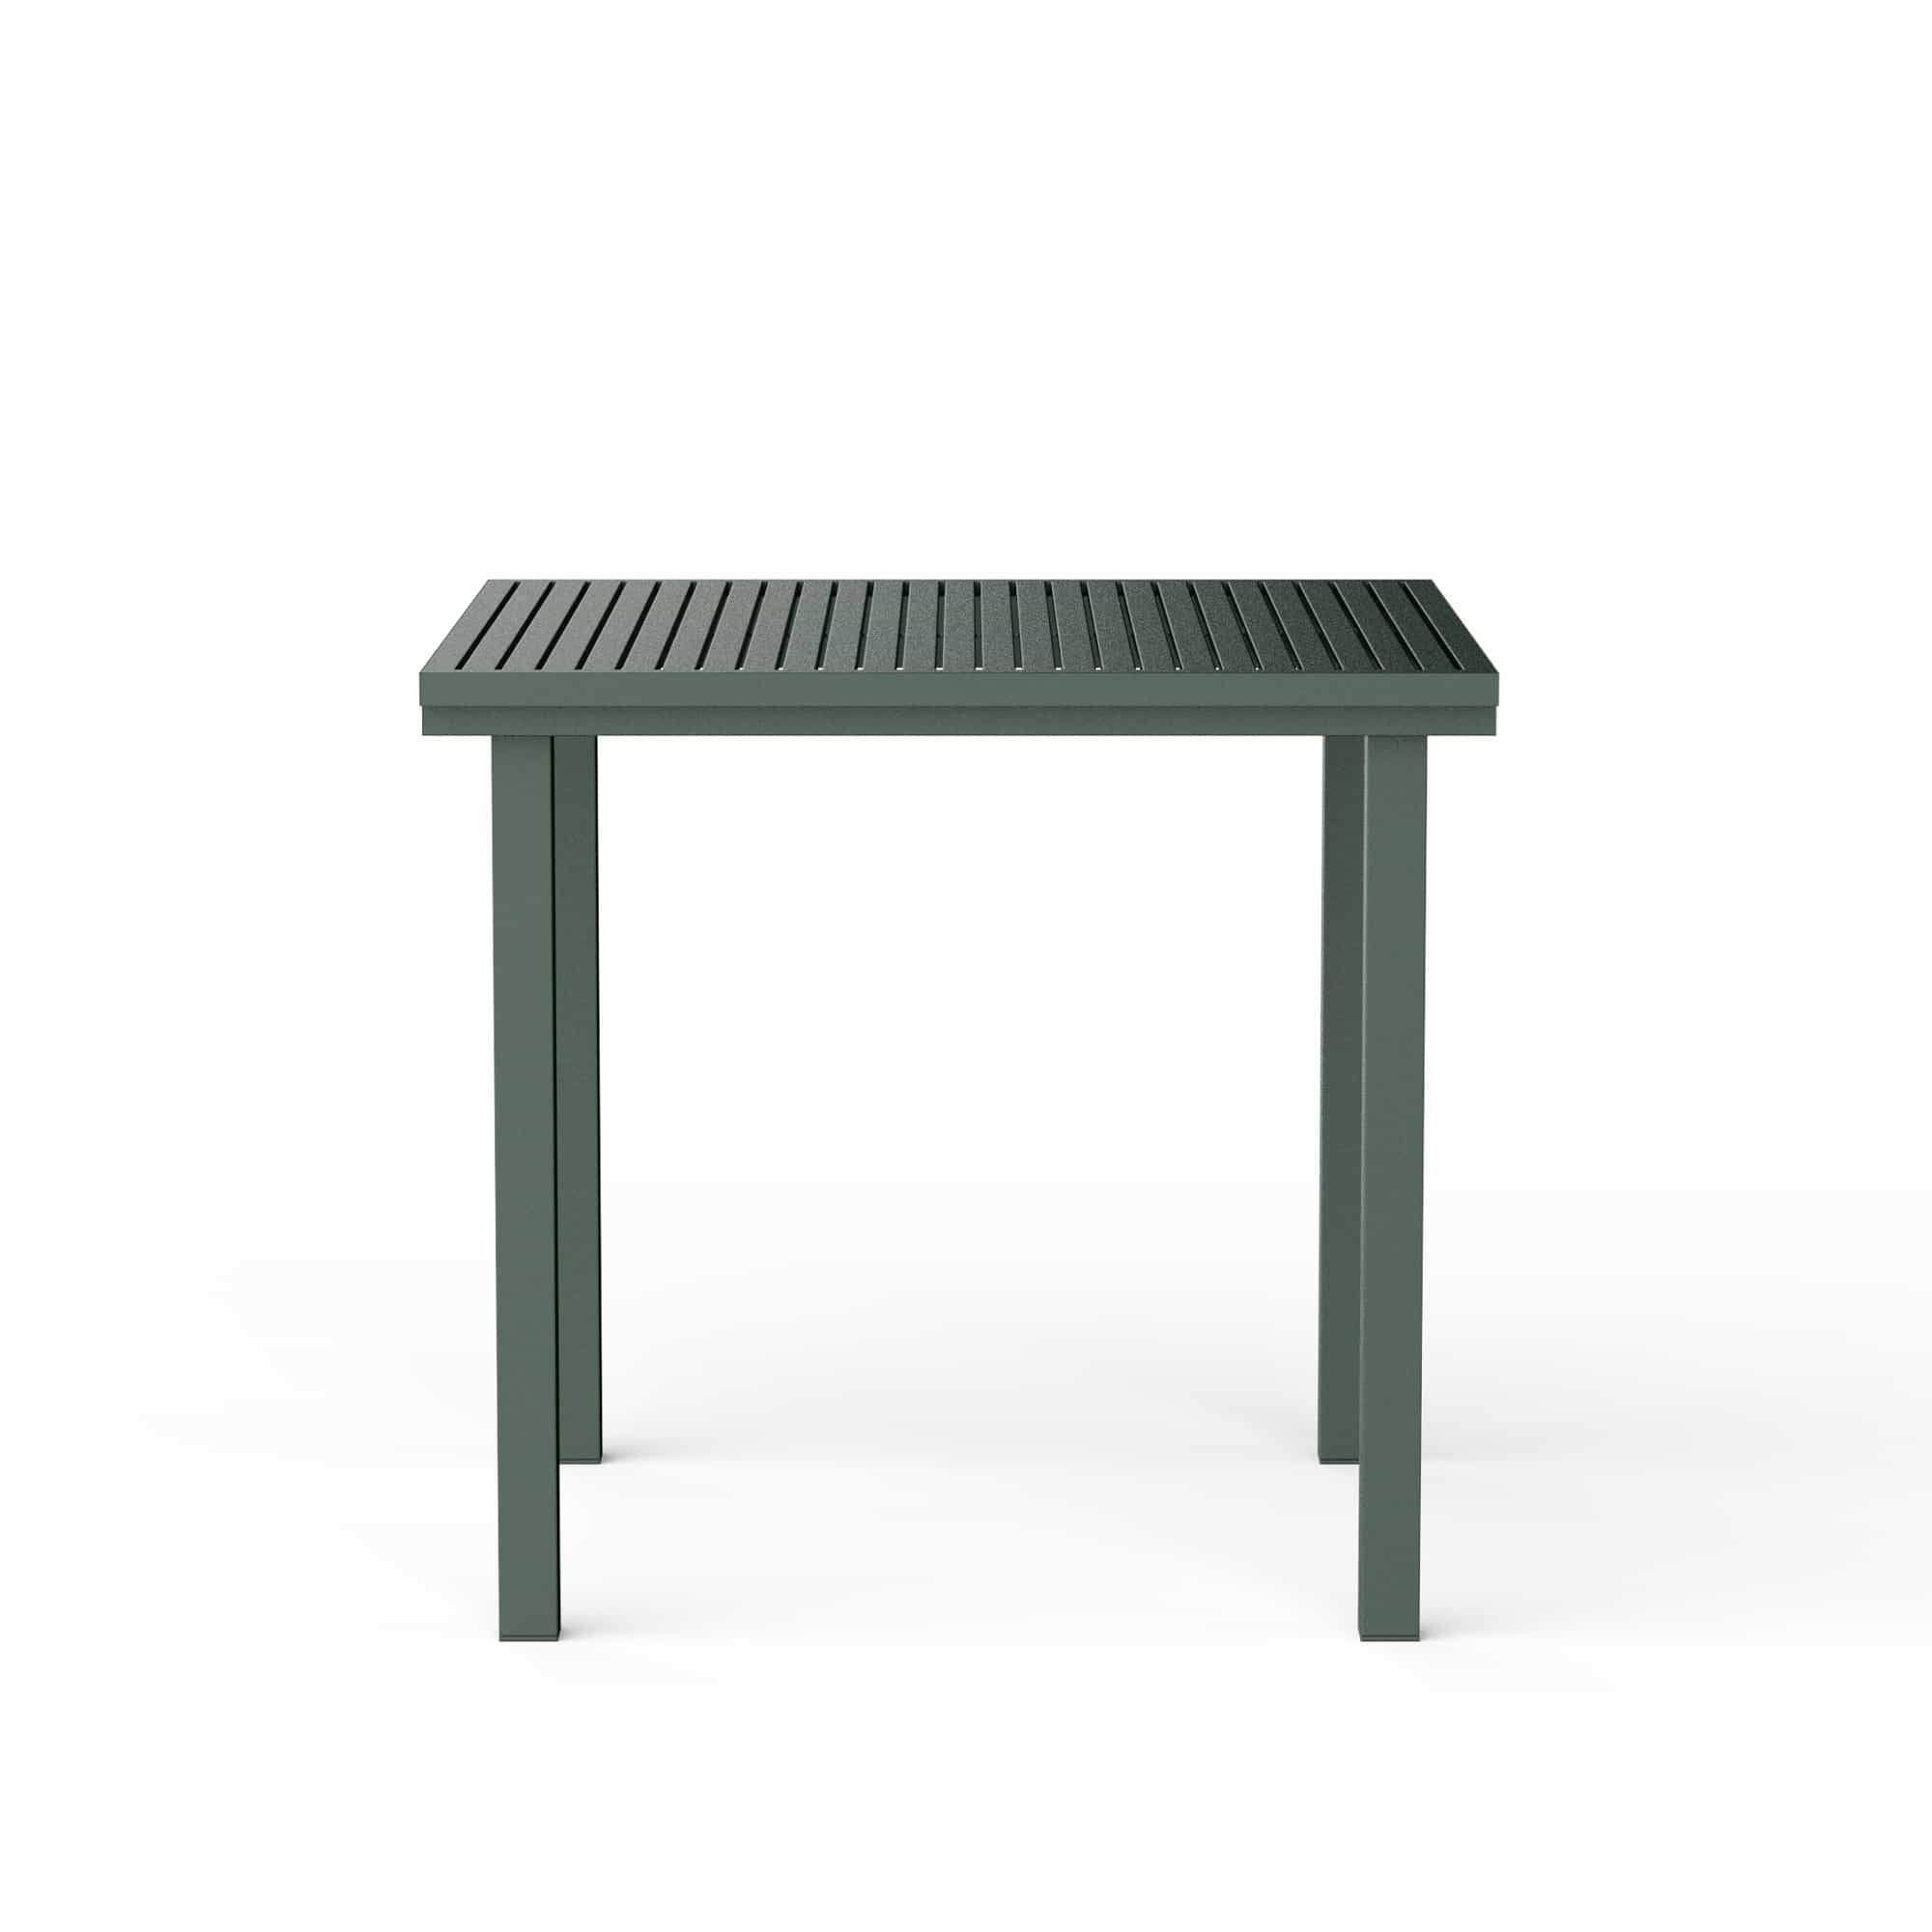 19 Outdoors Dining Table 80,5 x 80,5 cm